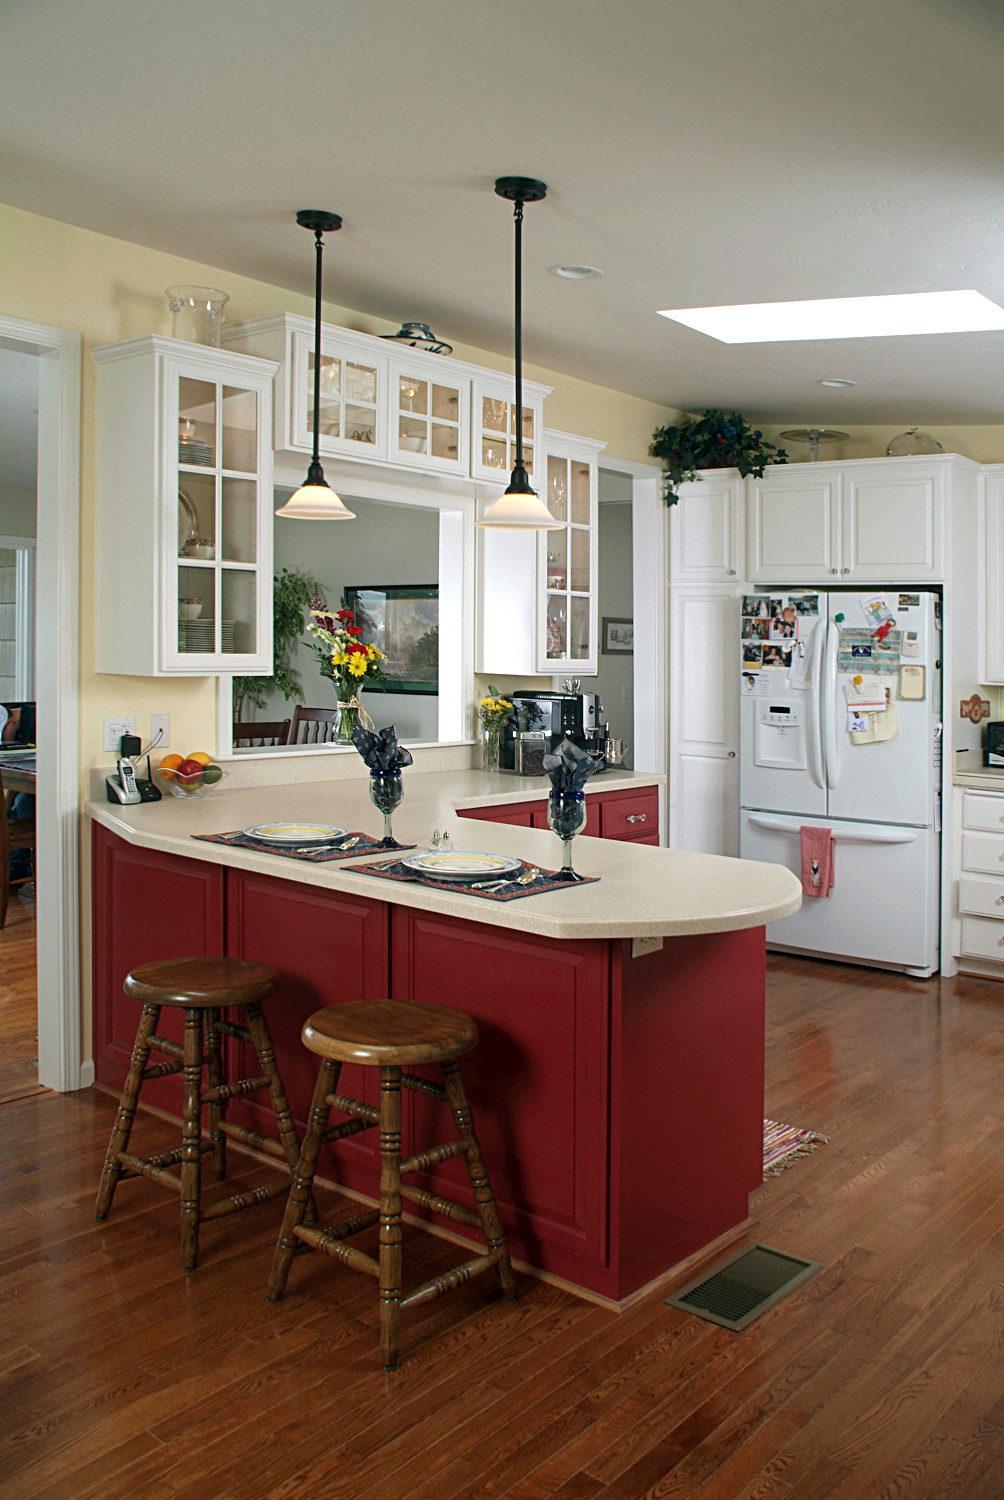 GE Profile #kitchen with red walls, white #cabinets and white